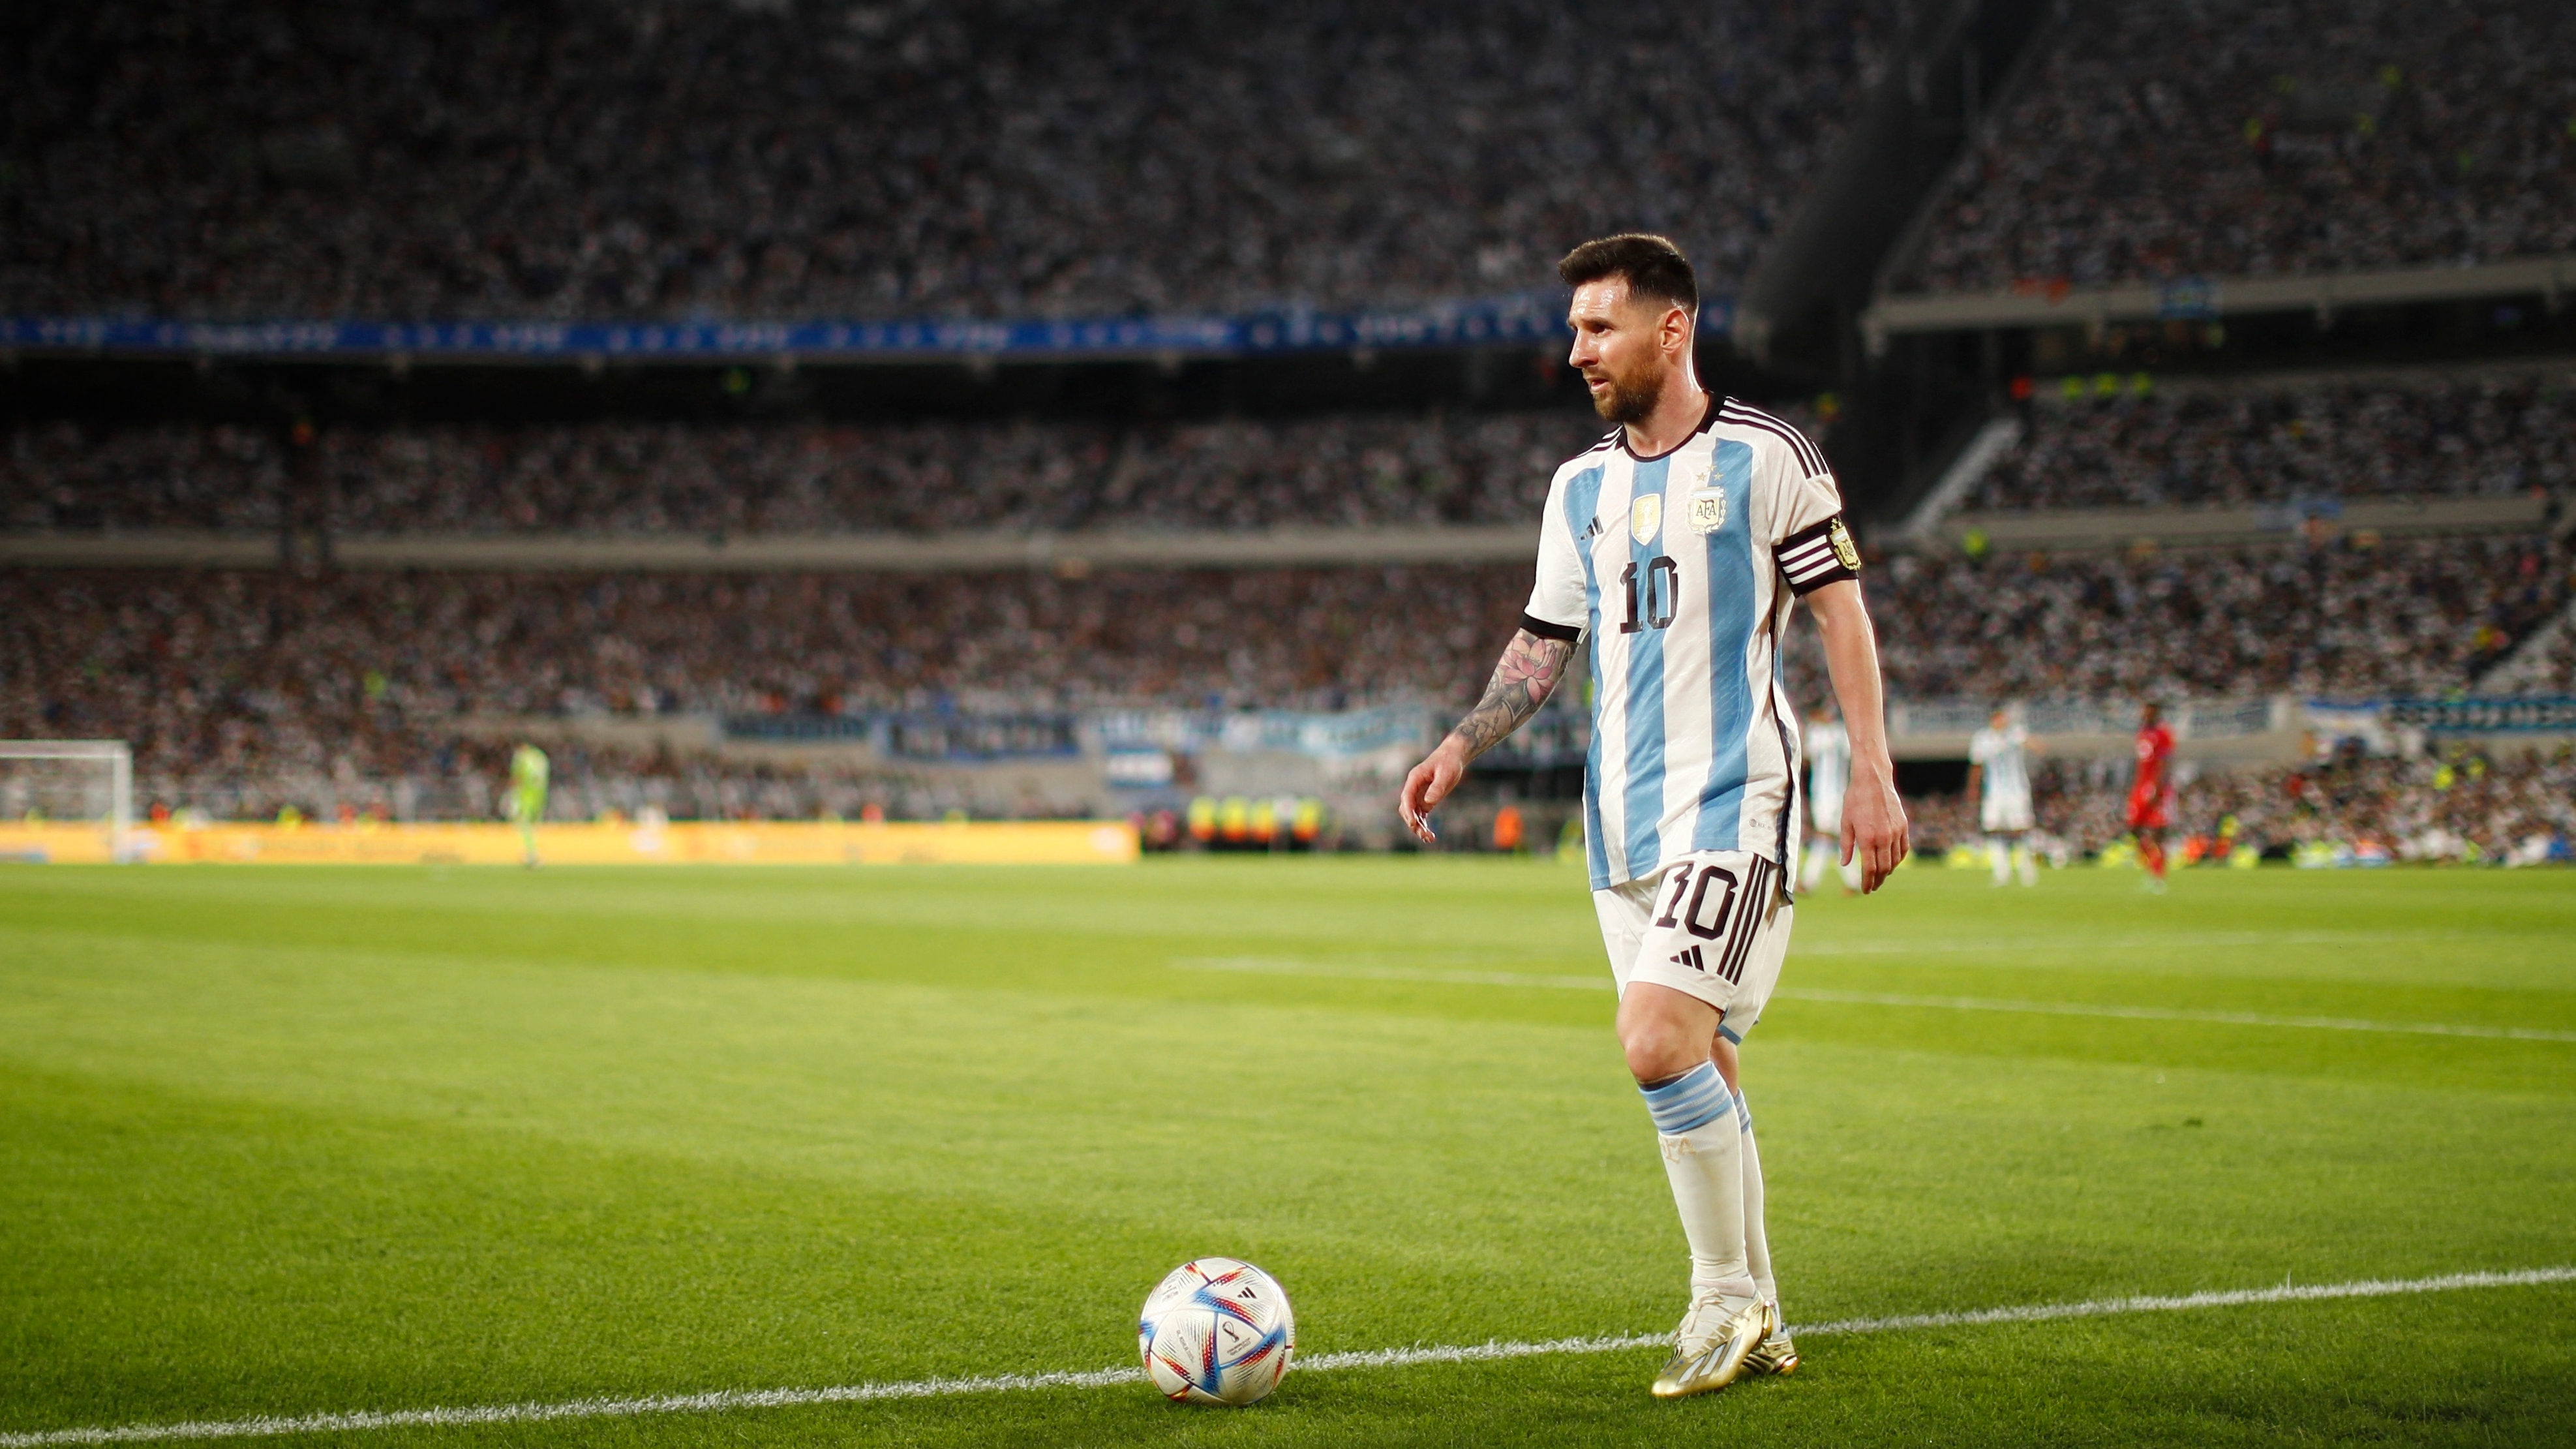 Soccer Football - International Friendly - Argentina v Panama - Estadio Monumental, Buenos Aires, Argentina - March 23, 2023 Argentina's Lionel Messi during the match REUTERS/Agustin Marcarian